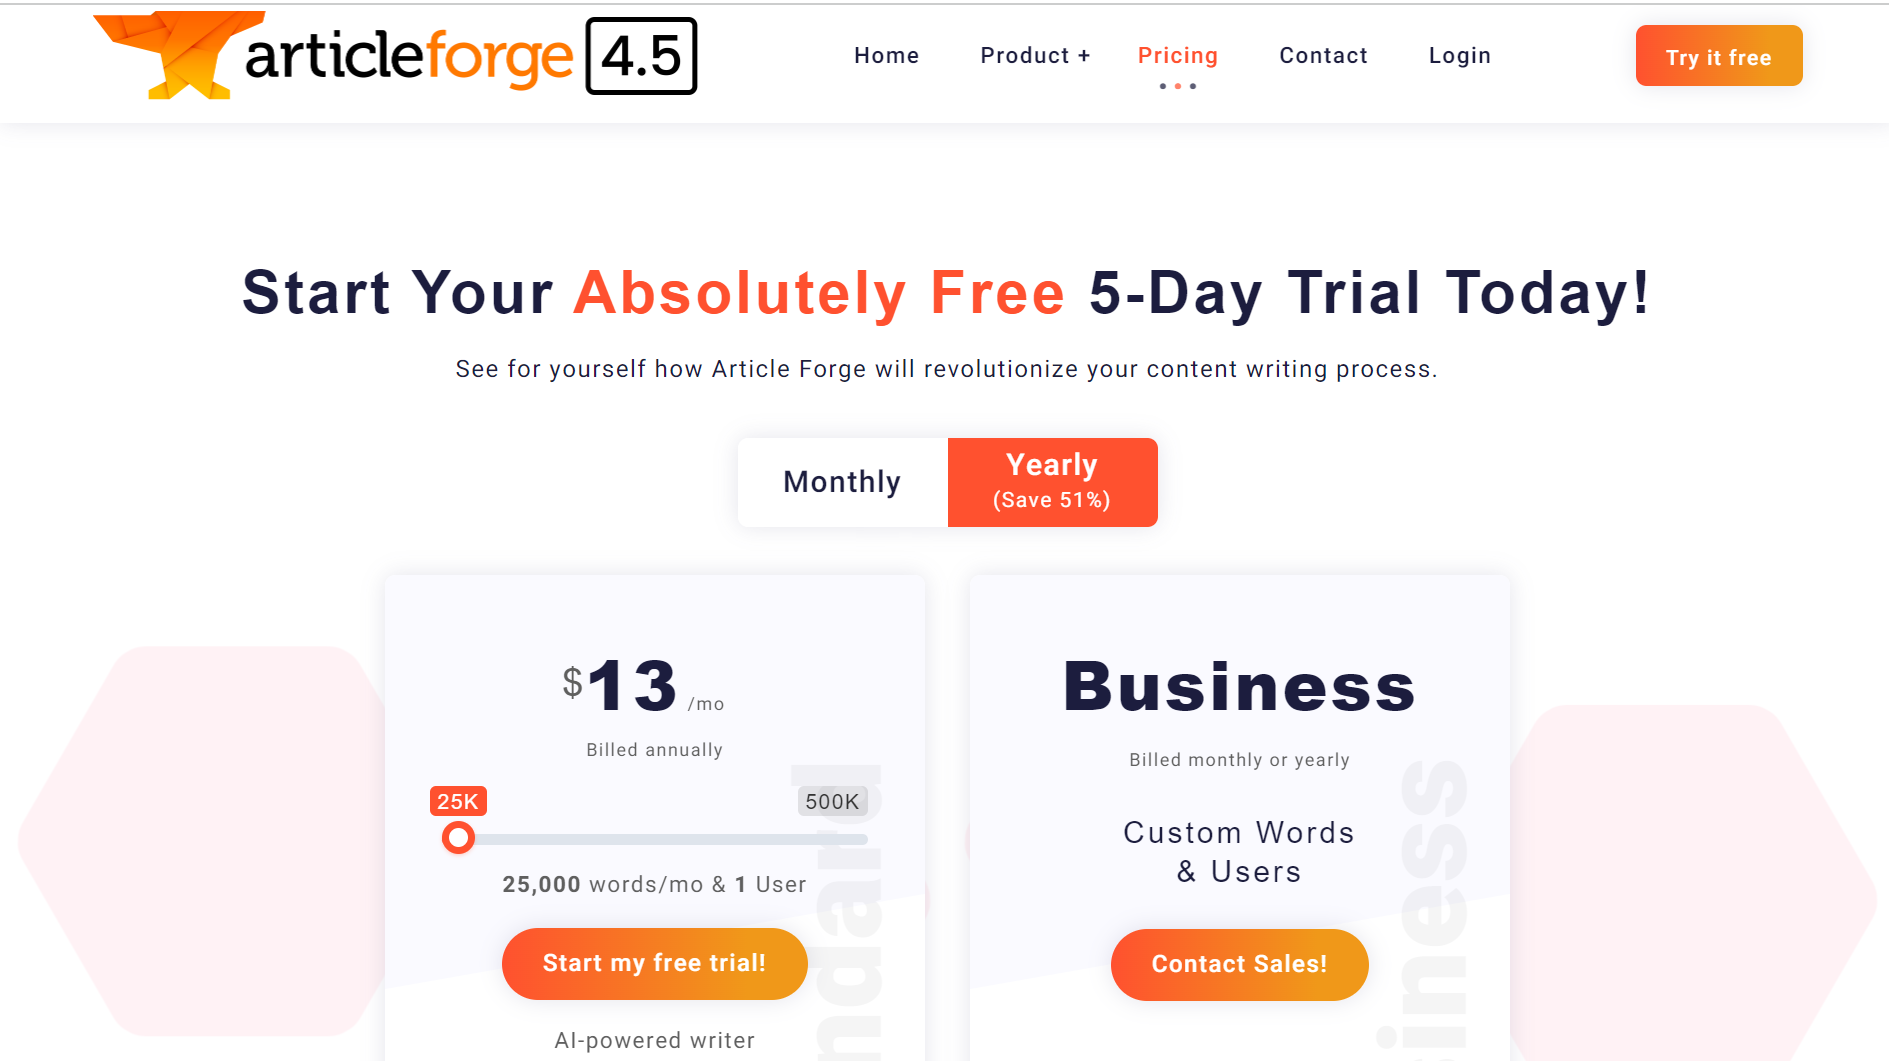 Article Forge prices